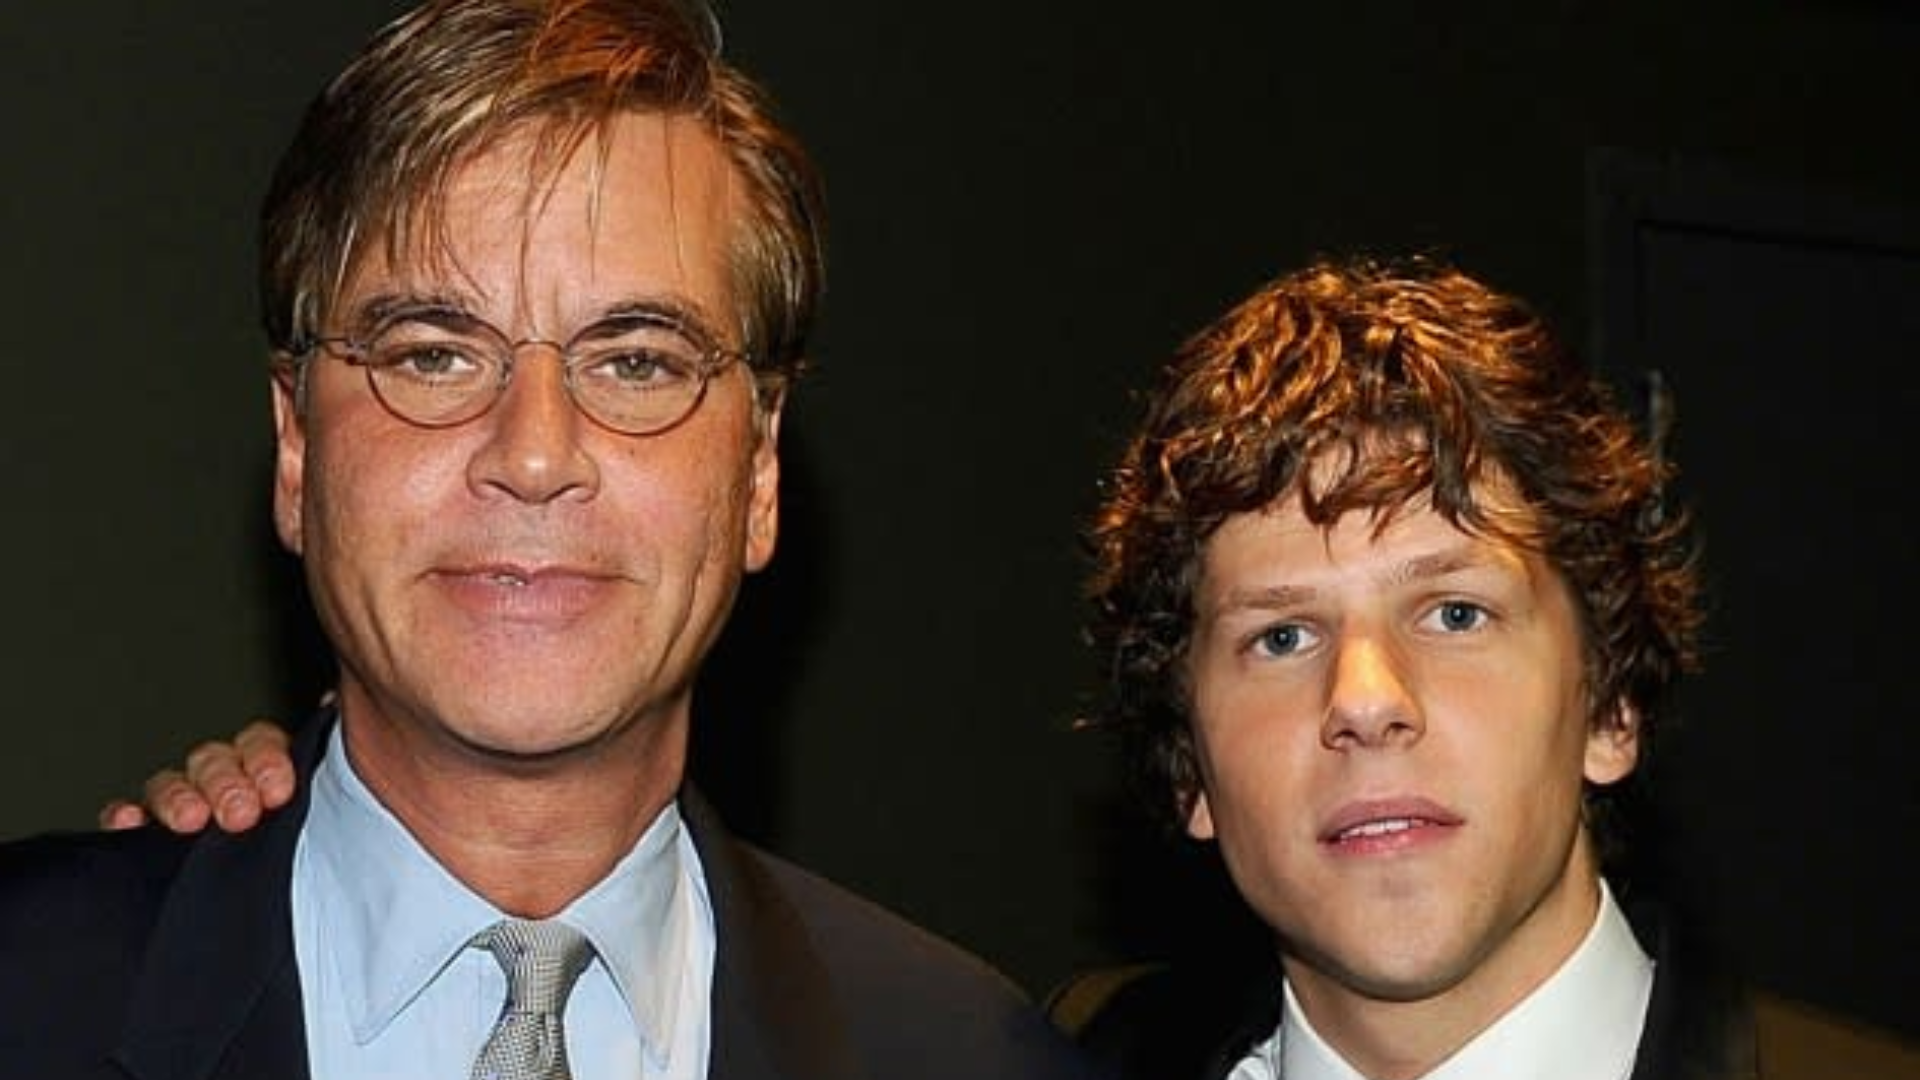 Aaron Sorkin’s Sequel Targets Capitol Storming In “The Social Network”